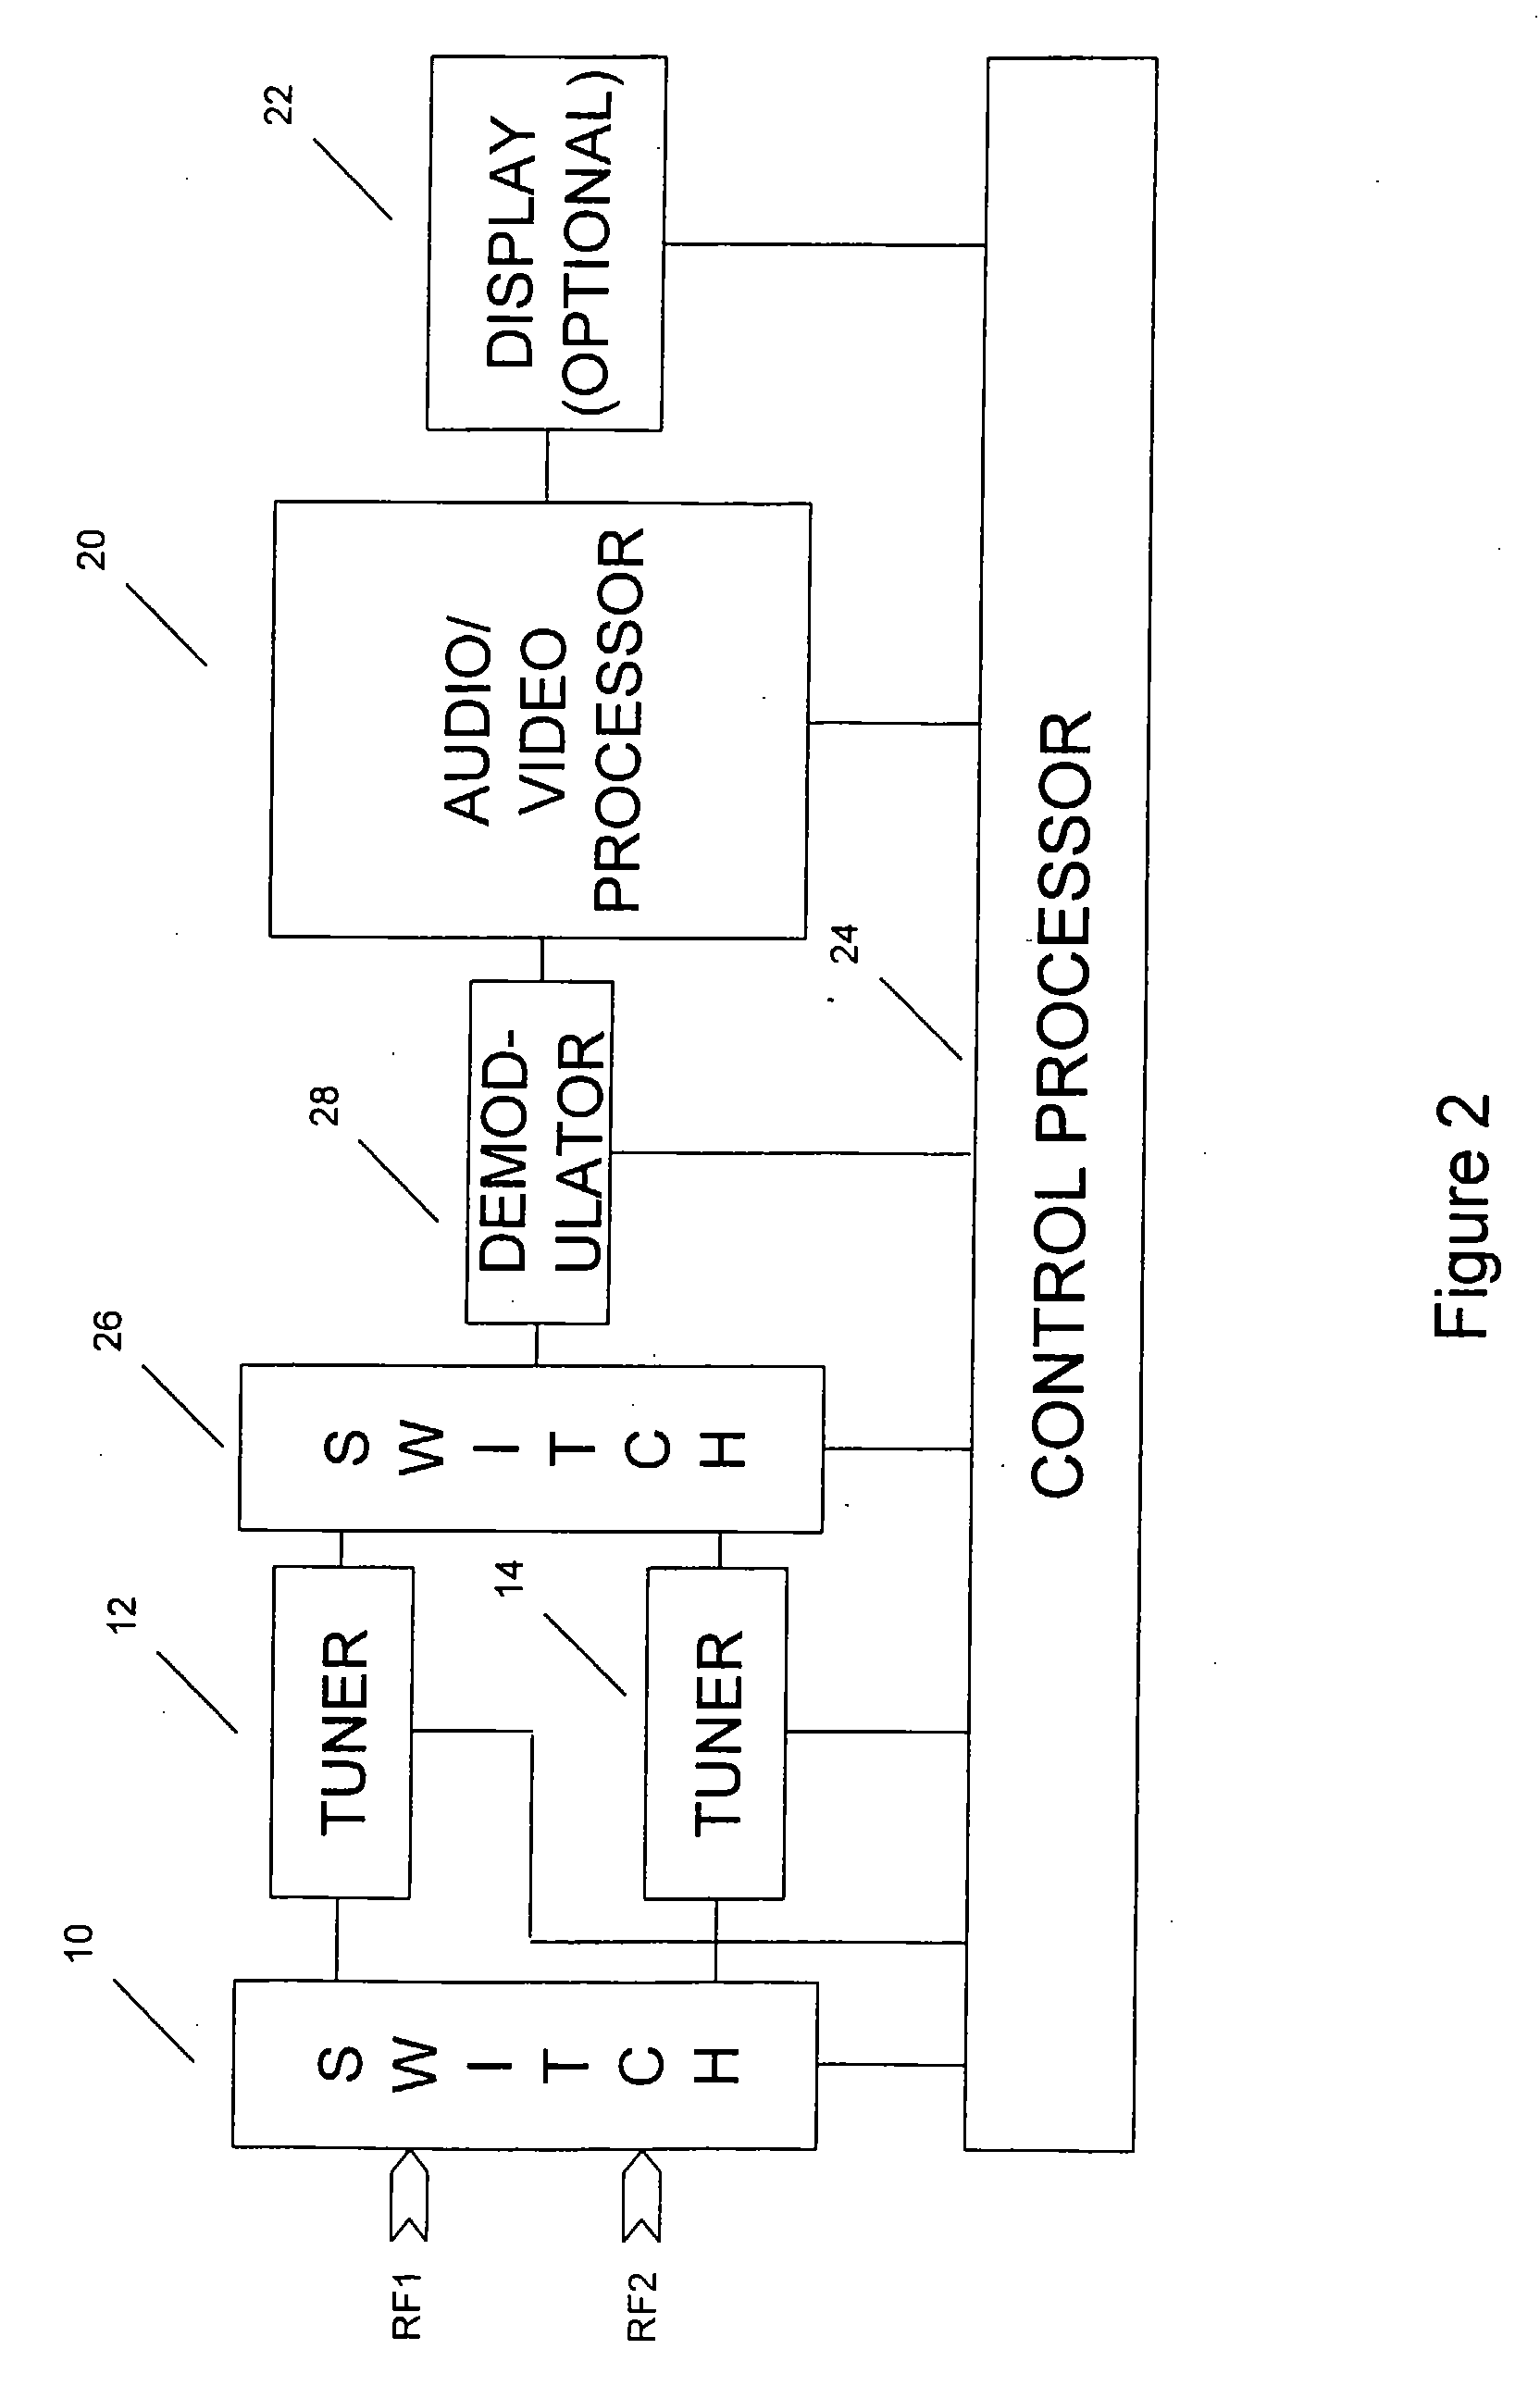 Method and Apparatus for Performing a Channel Search